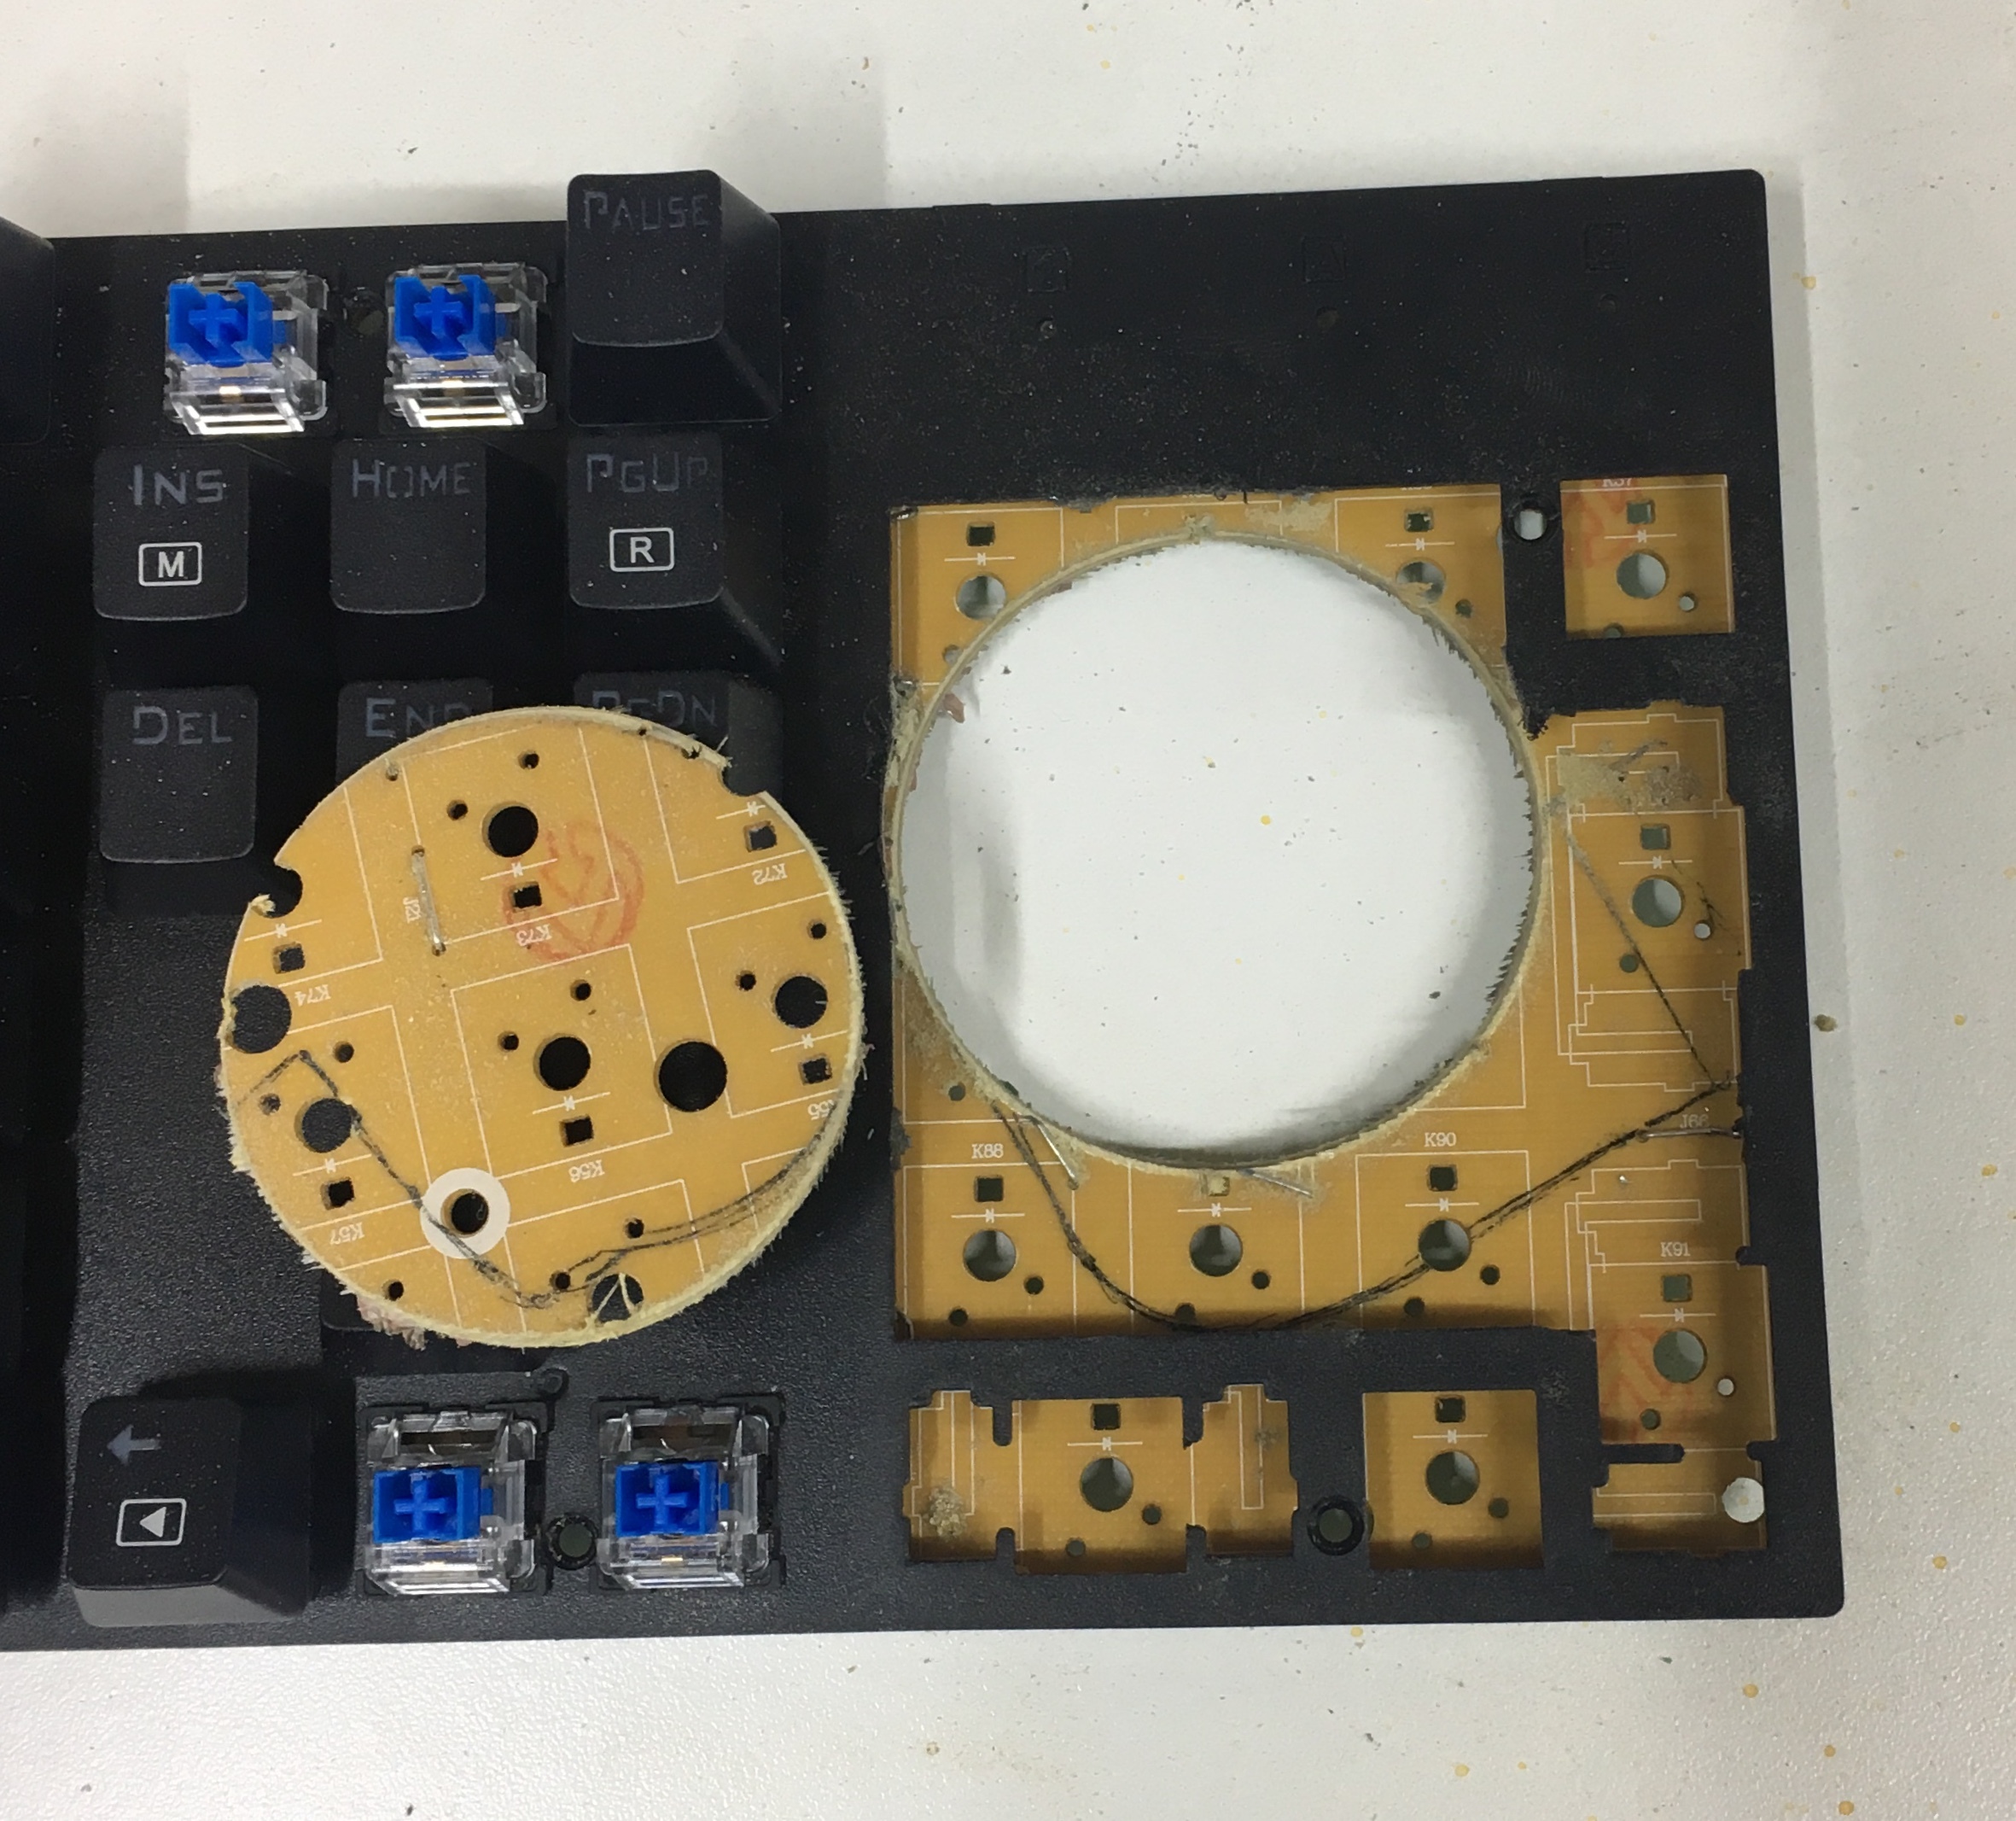 Part of the PCB has been cut out with a hole saw